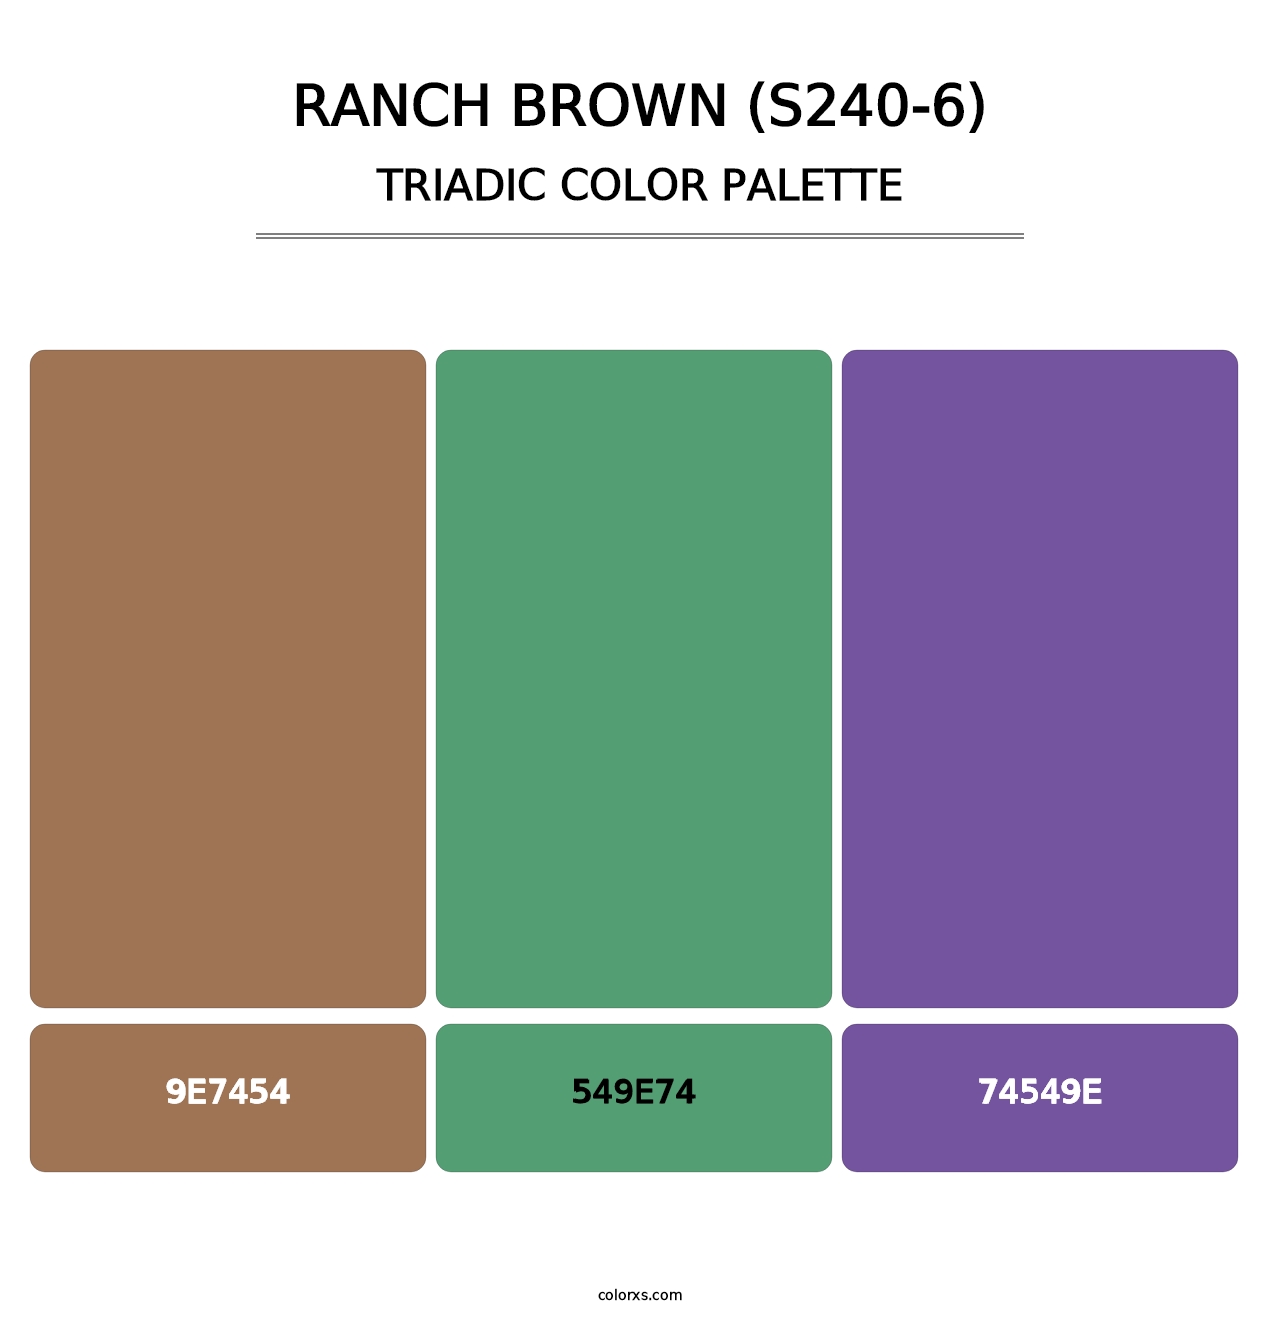 Ranch Brown (S240-6) - Triadic Color Palette